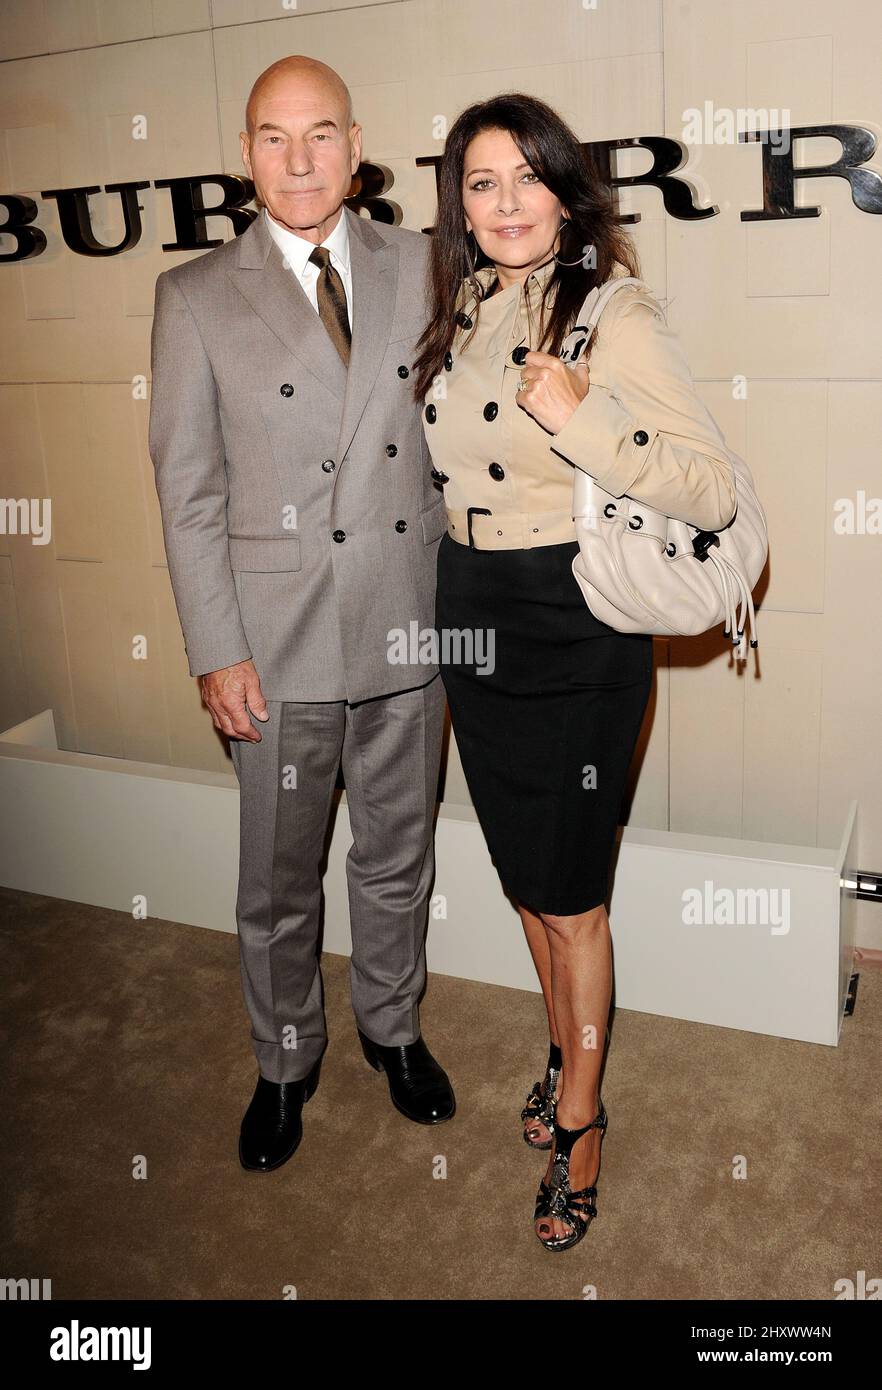 Patrick Stewart and Marina Sirtis during the 'Burberry Body' Burberry Fragrance Launch Party held at Burberry, California Stock Photo